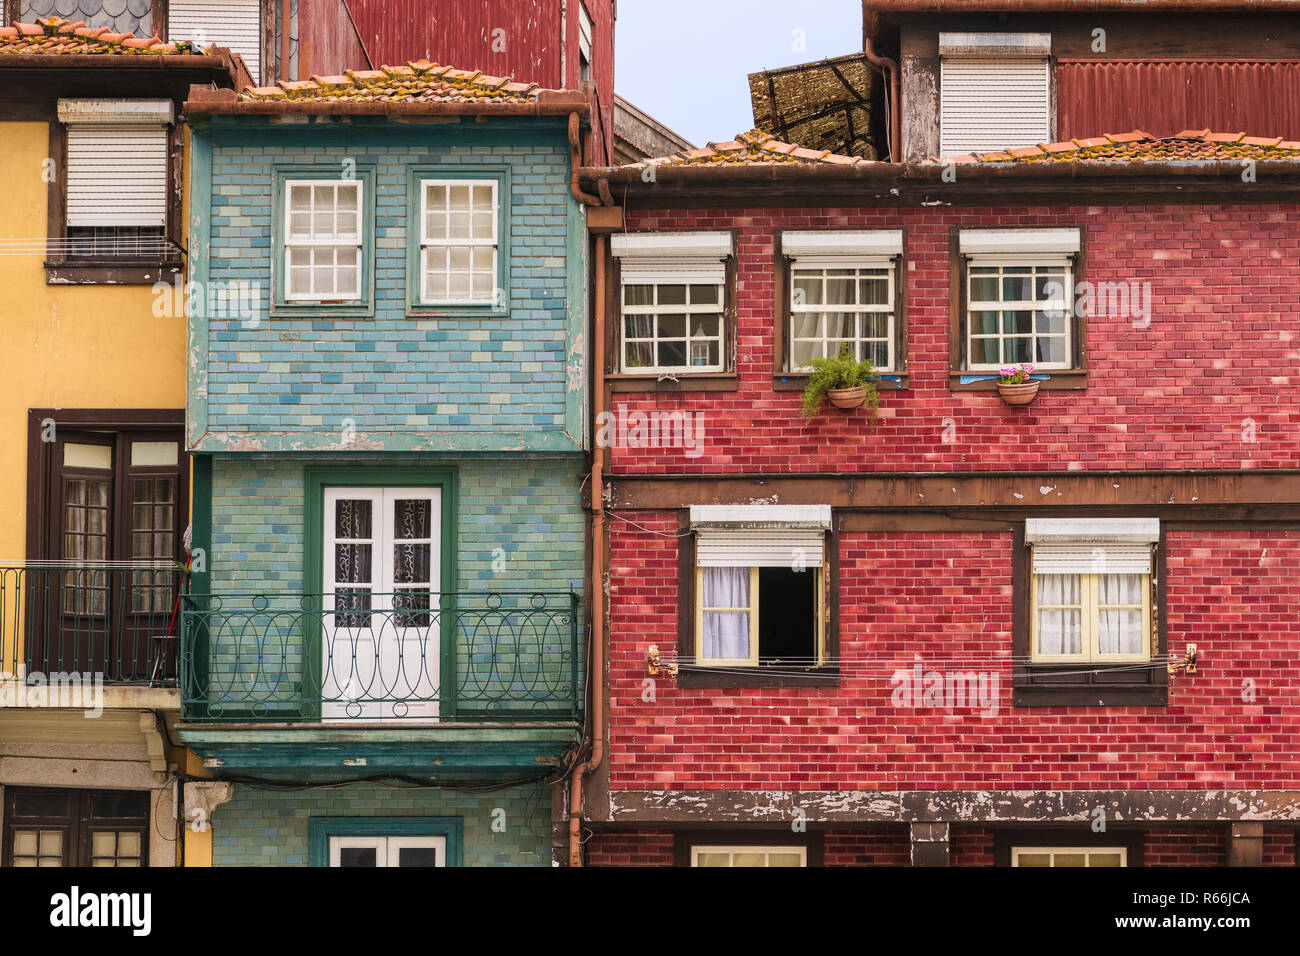 Colorful, old, weathered buildings with tiled and stucco facades in red, yellow, and blue hues in Porto, Portugal Stock Photo